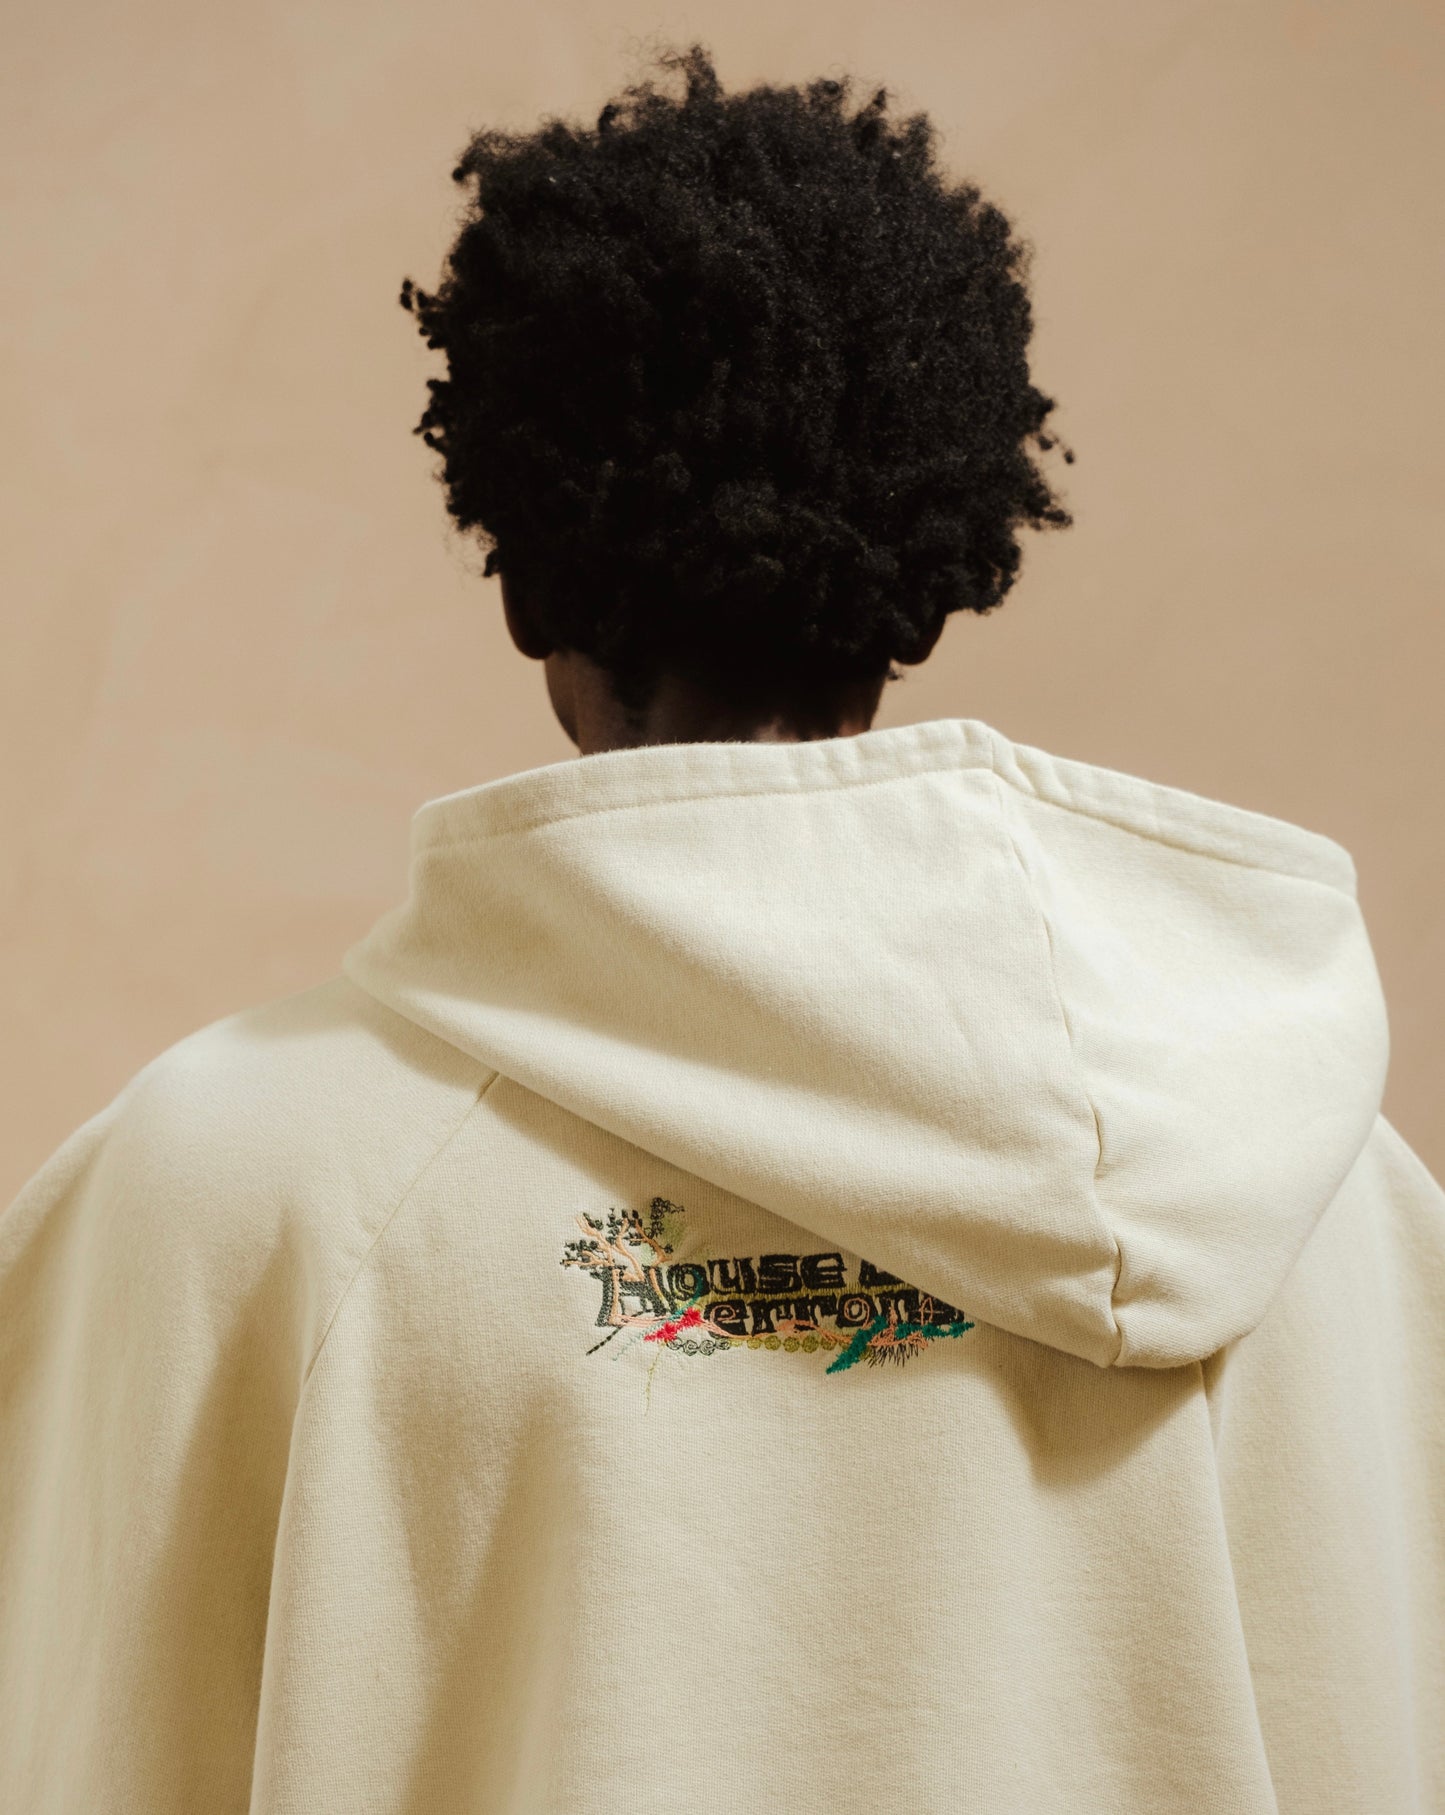 ALL-SEEING GARDEN EMBROIDERED HOODIE IN SAHARA